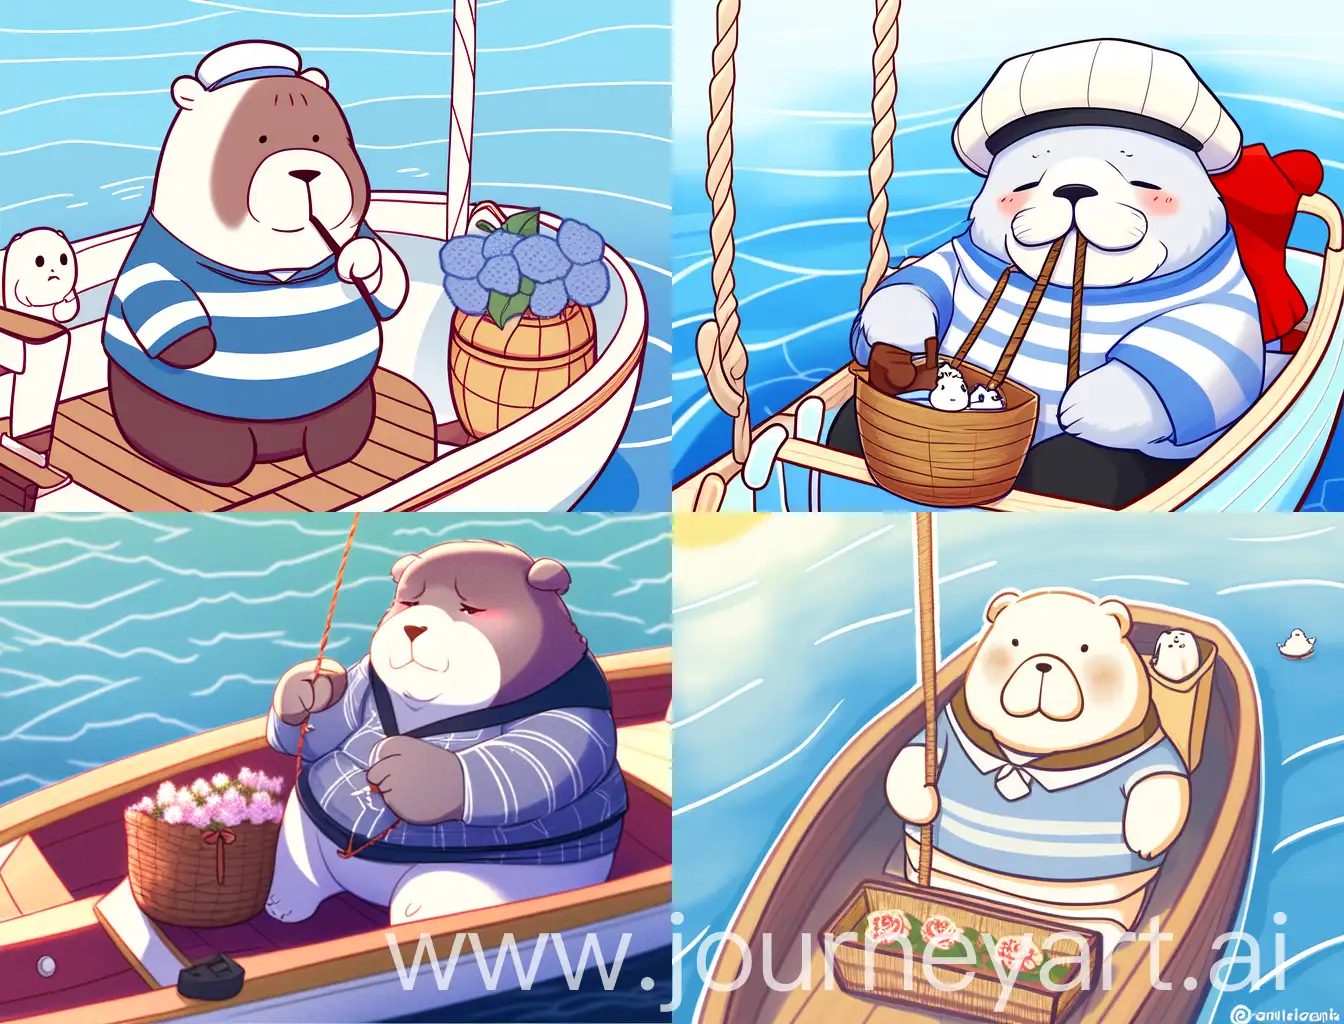 Adorable-Walrus-Knitting-on-Boat-in-Striped-Shirt